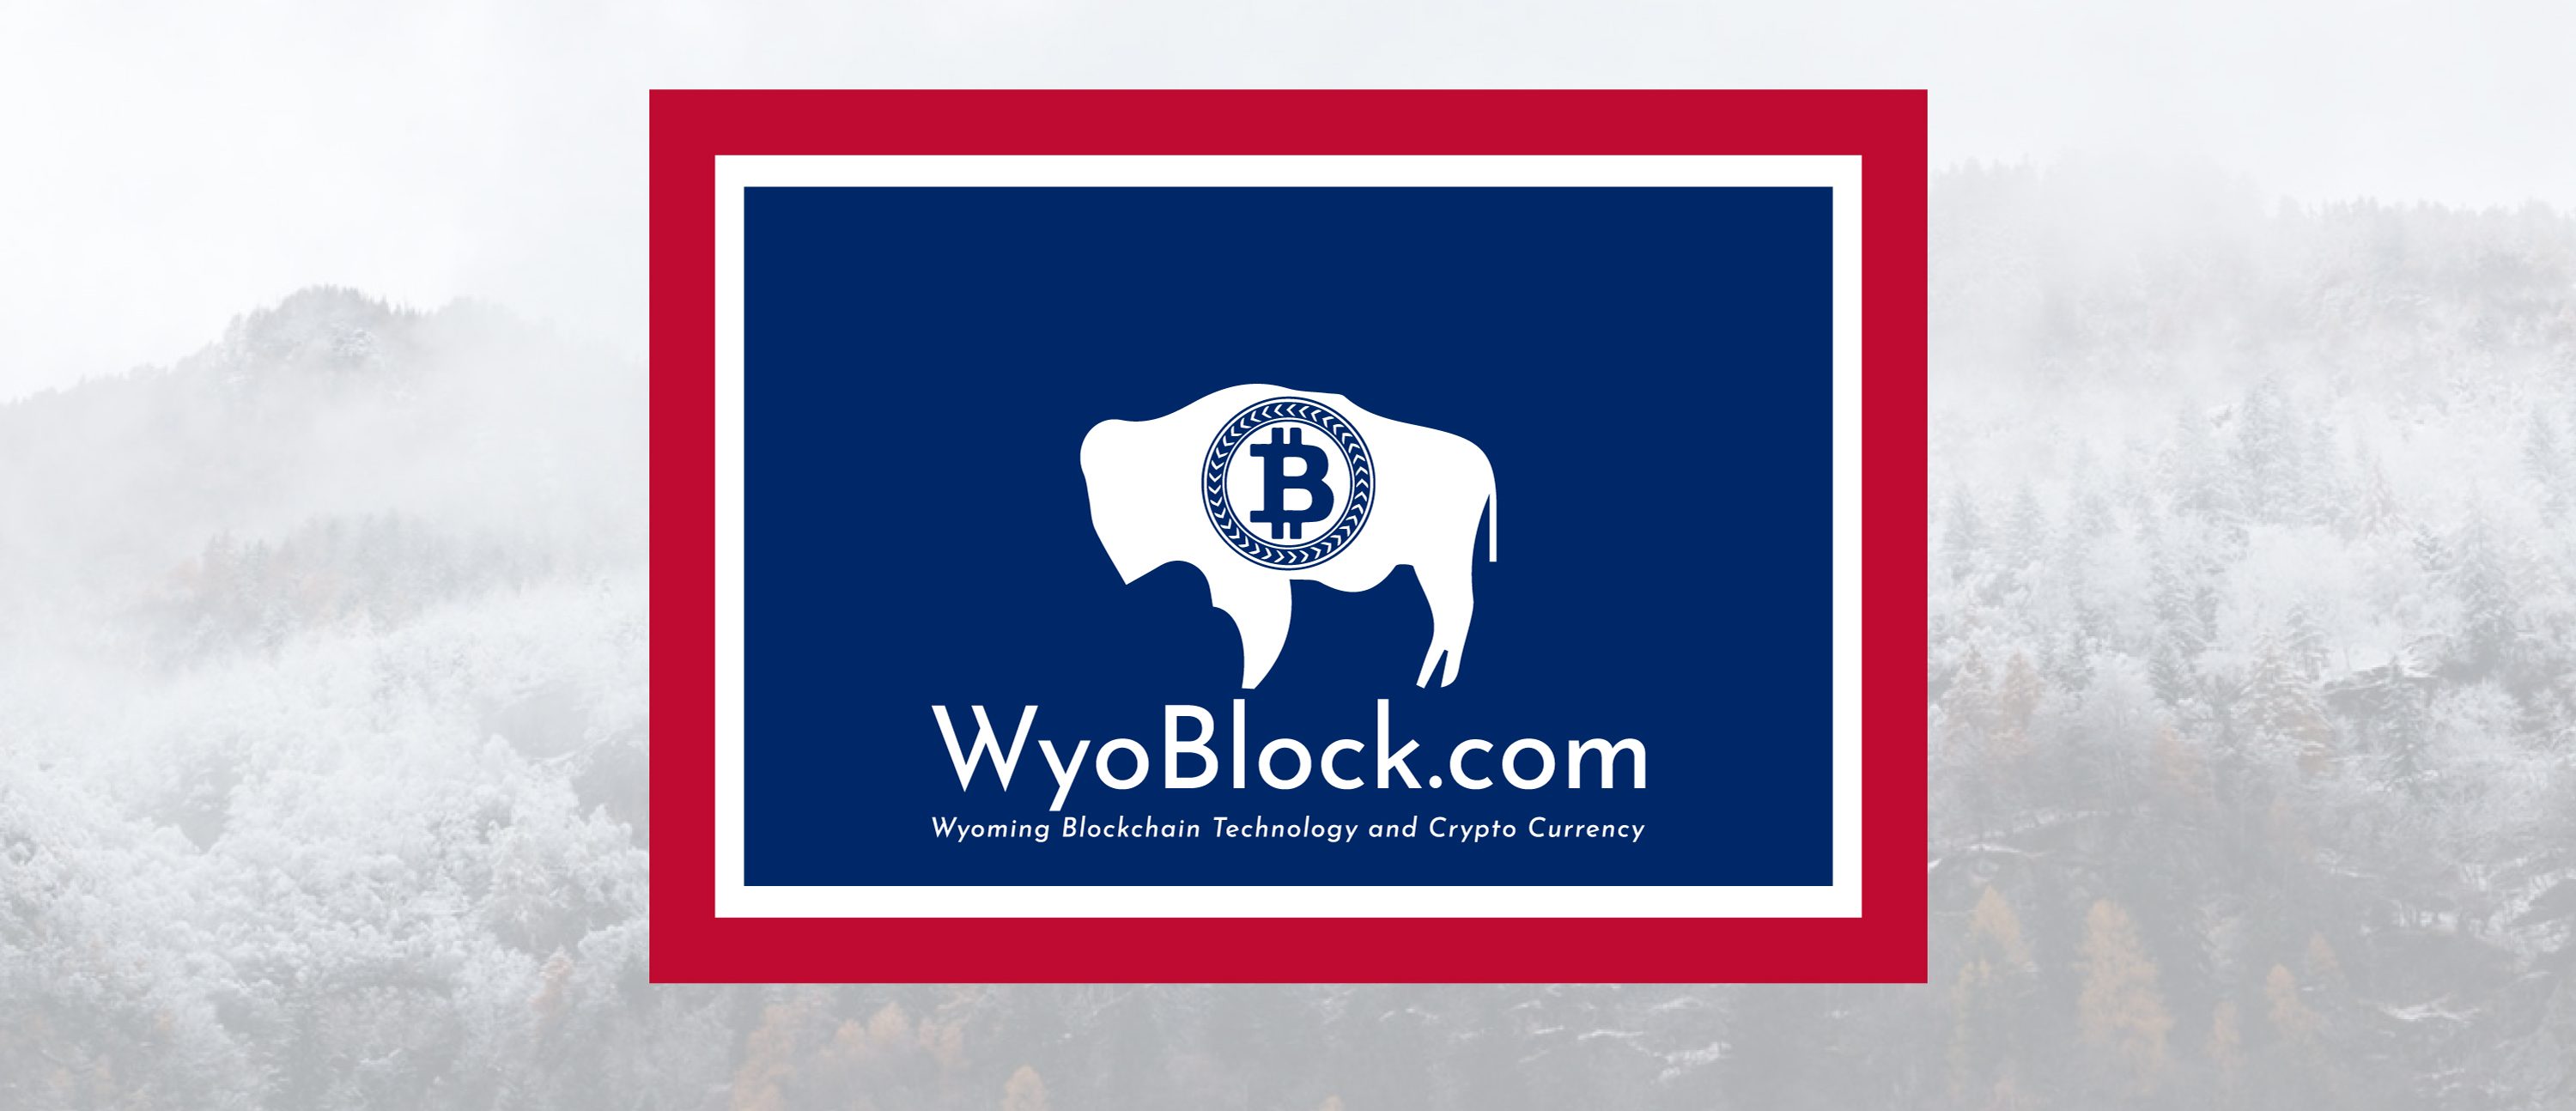 Wyoming Blockchain Technology and Crypto Currency